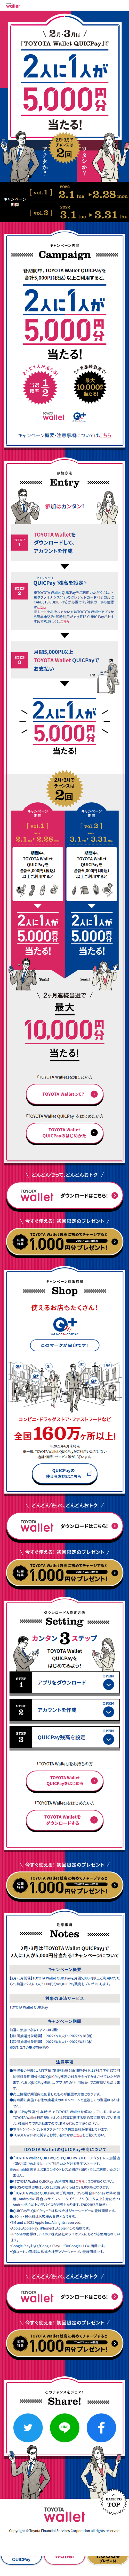 TOYOTA Wallet QUICPay_sp_1